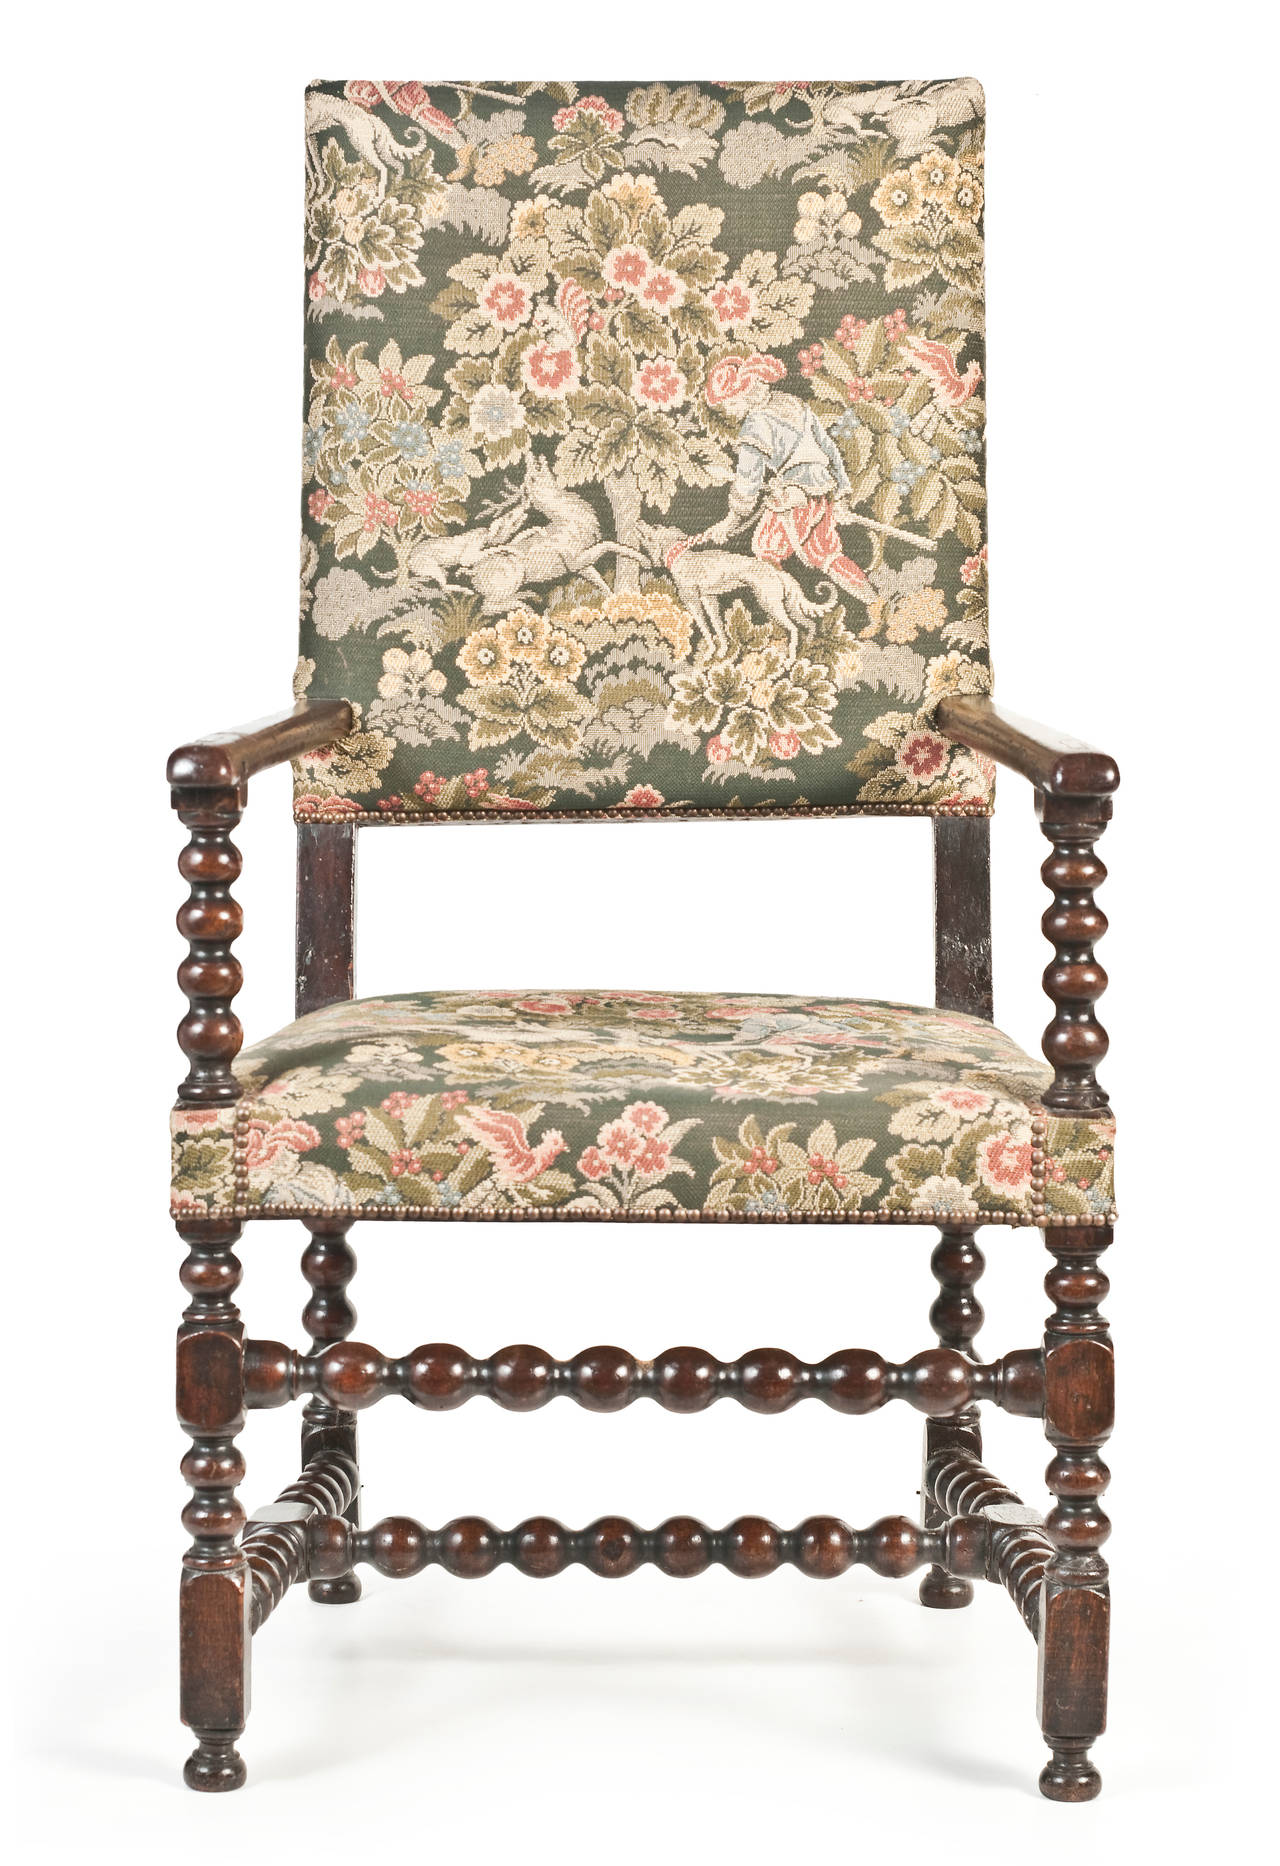 Early 19th century French oak bobbin-turned tapestry upholstered armchair.

This armchair would look exceptional in a plain off-white piped or studded material. If I have little interest, I'll have reupholstered.

Note: Just arrived from France.